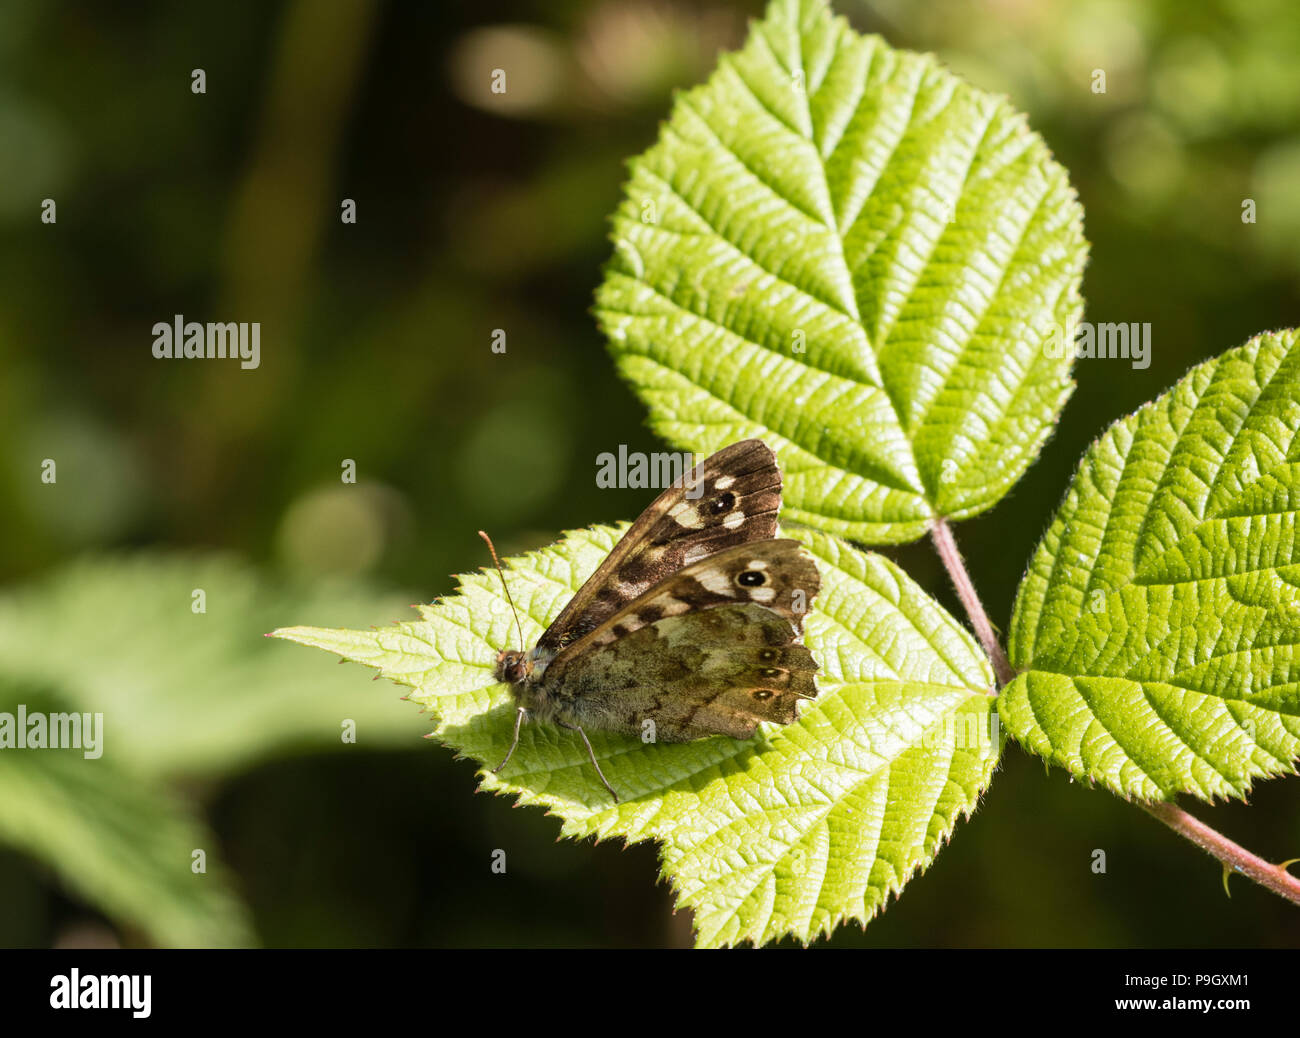 Speckled Wood butterfly on bramble leaves, Shropshire-Wales Border near Knighton Stock Photo